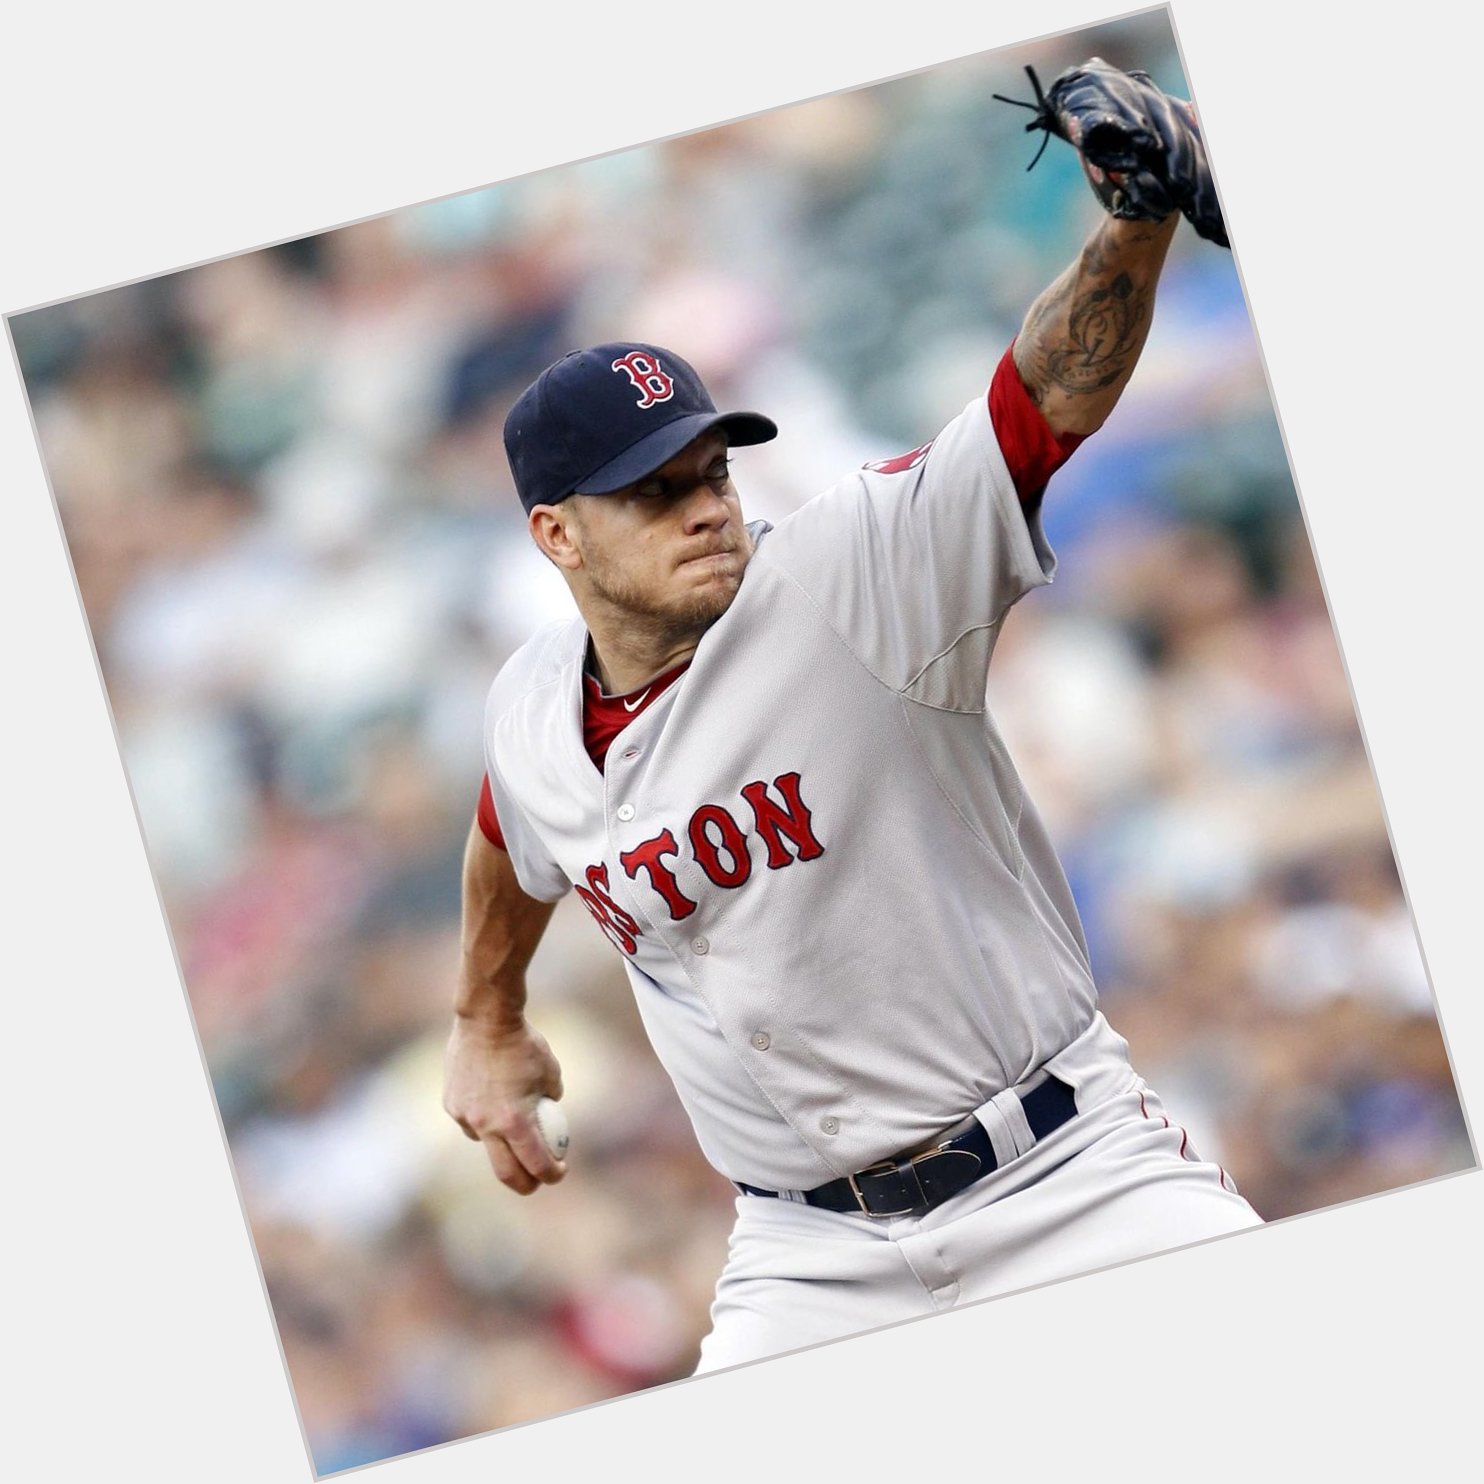 Happy birthday to Boston Red Sox pitching great, Jake Peavy. Champion. 